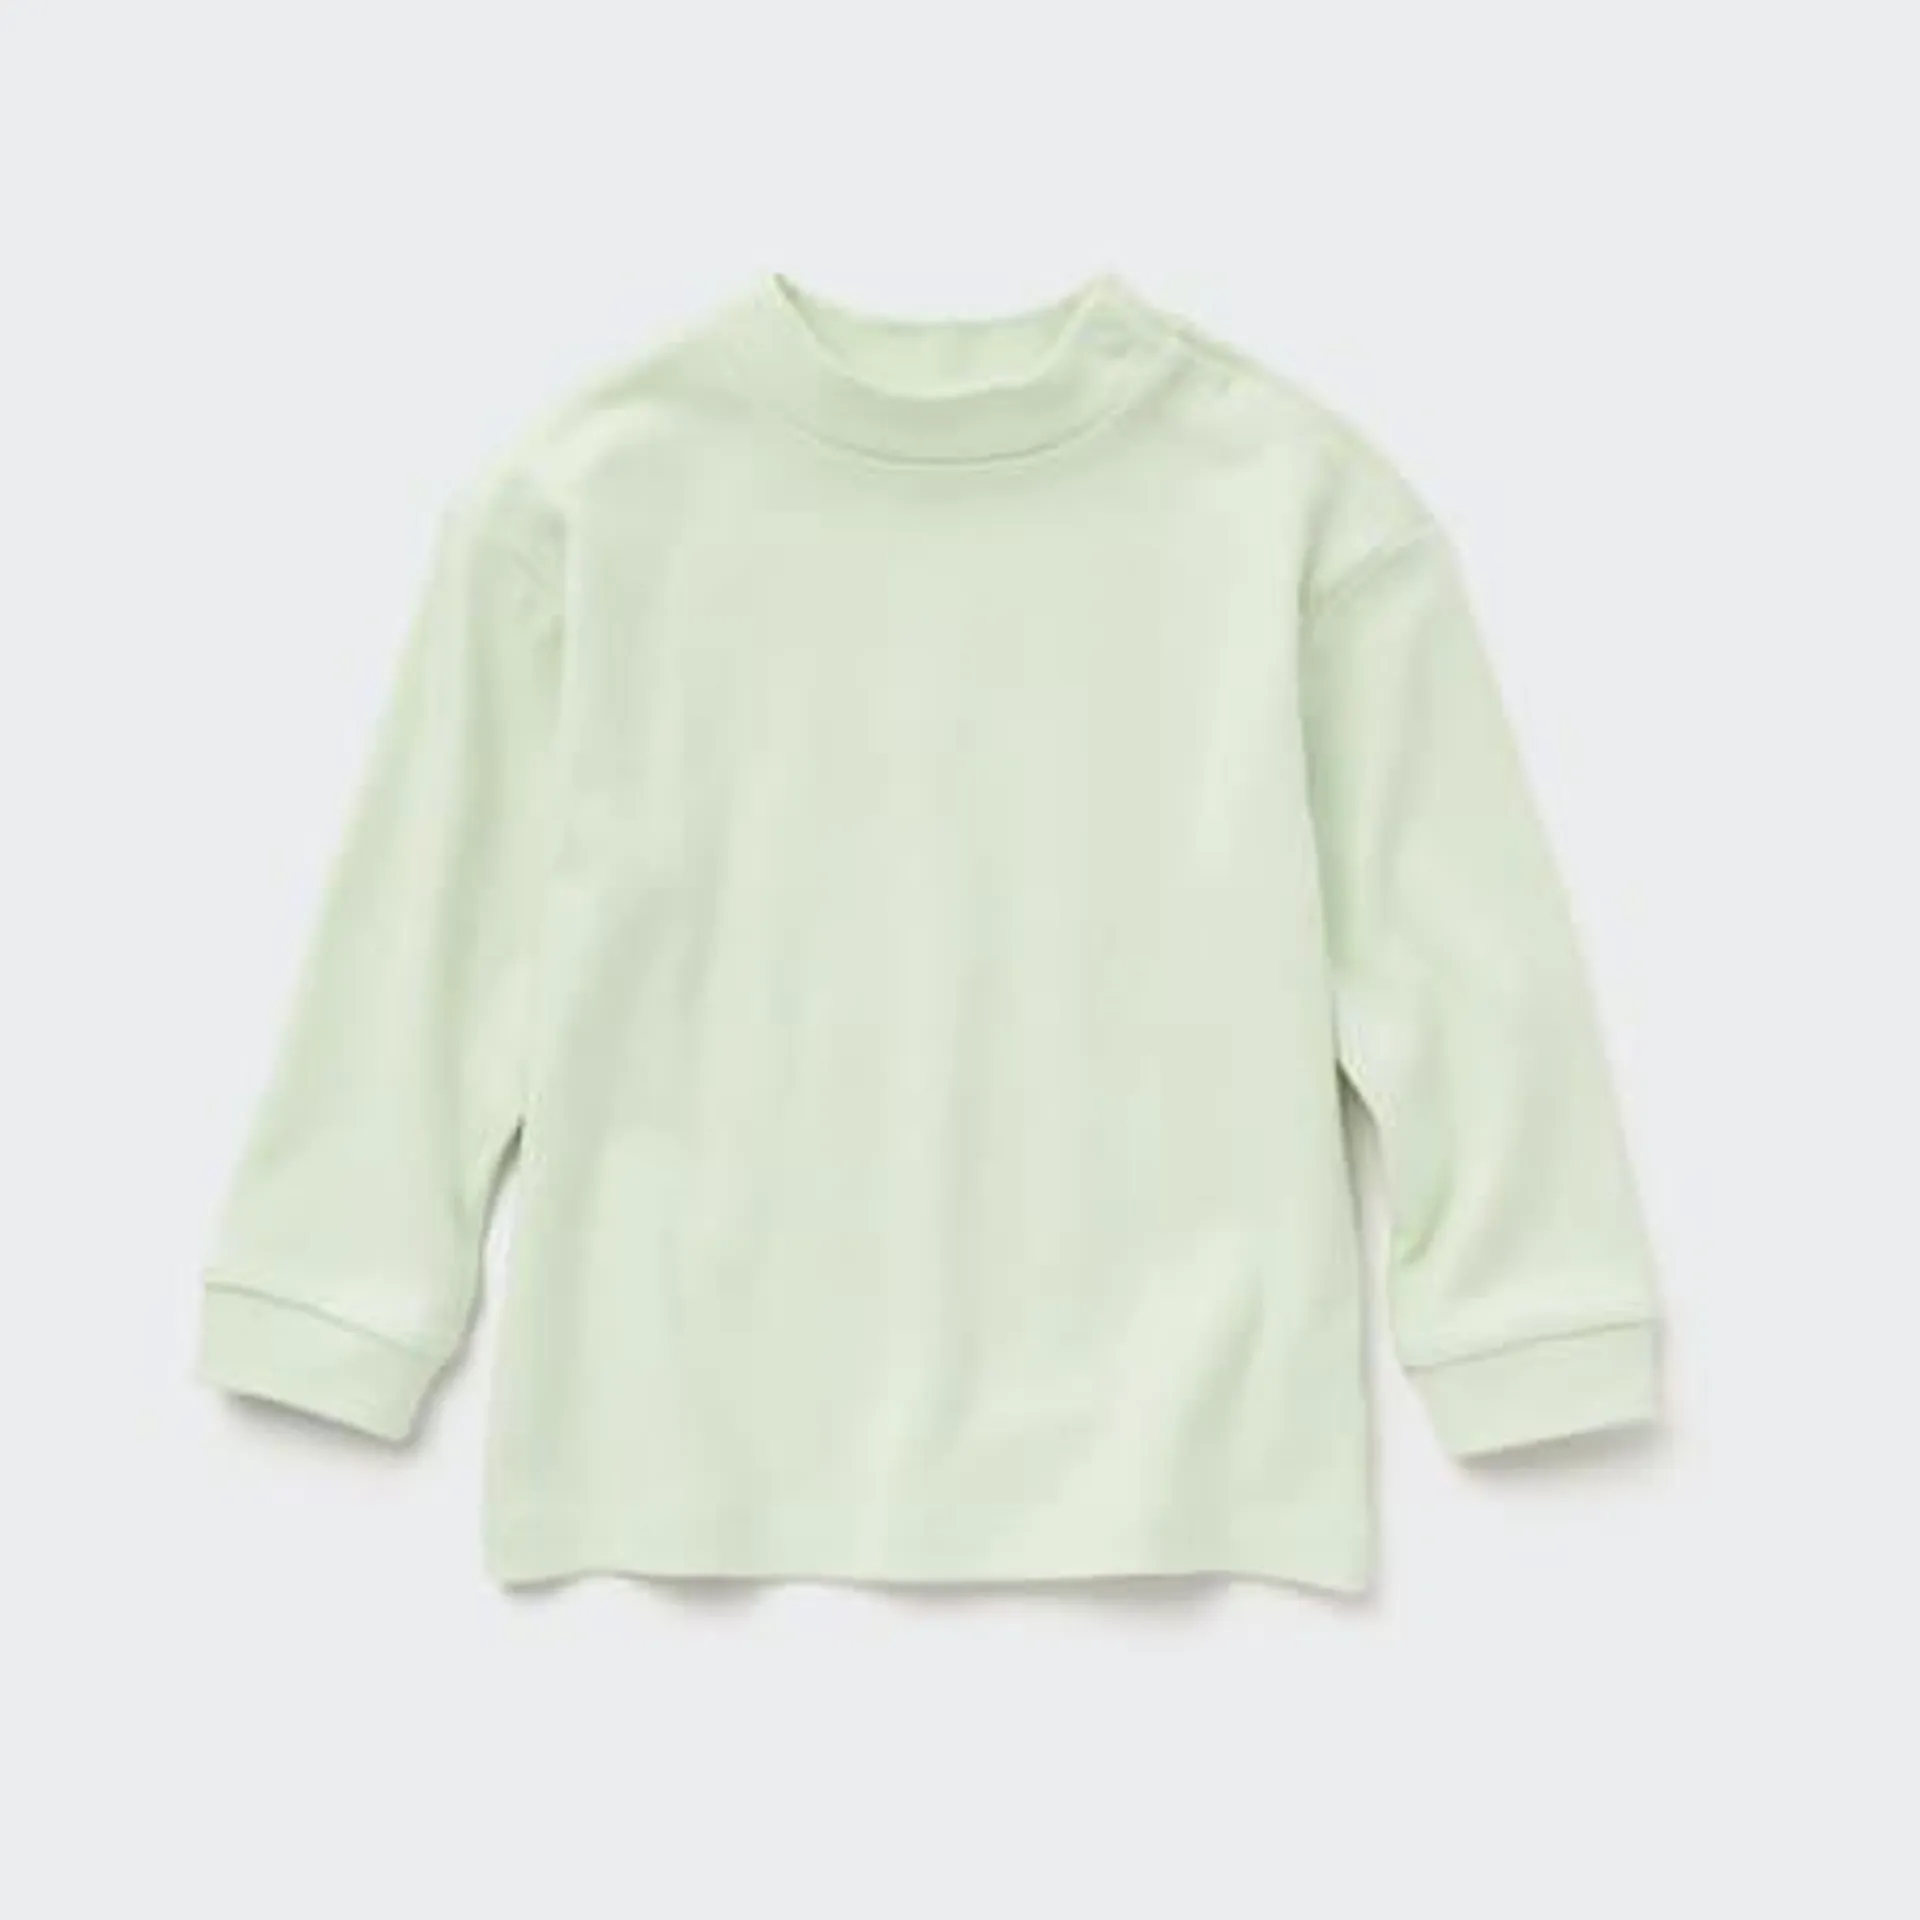 Babies Soft Touch Cotton Mock Neck Long Sleeved T-Shirt